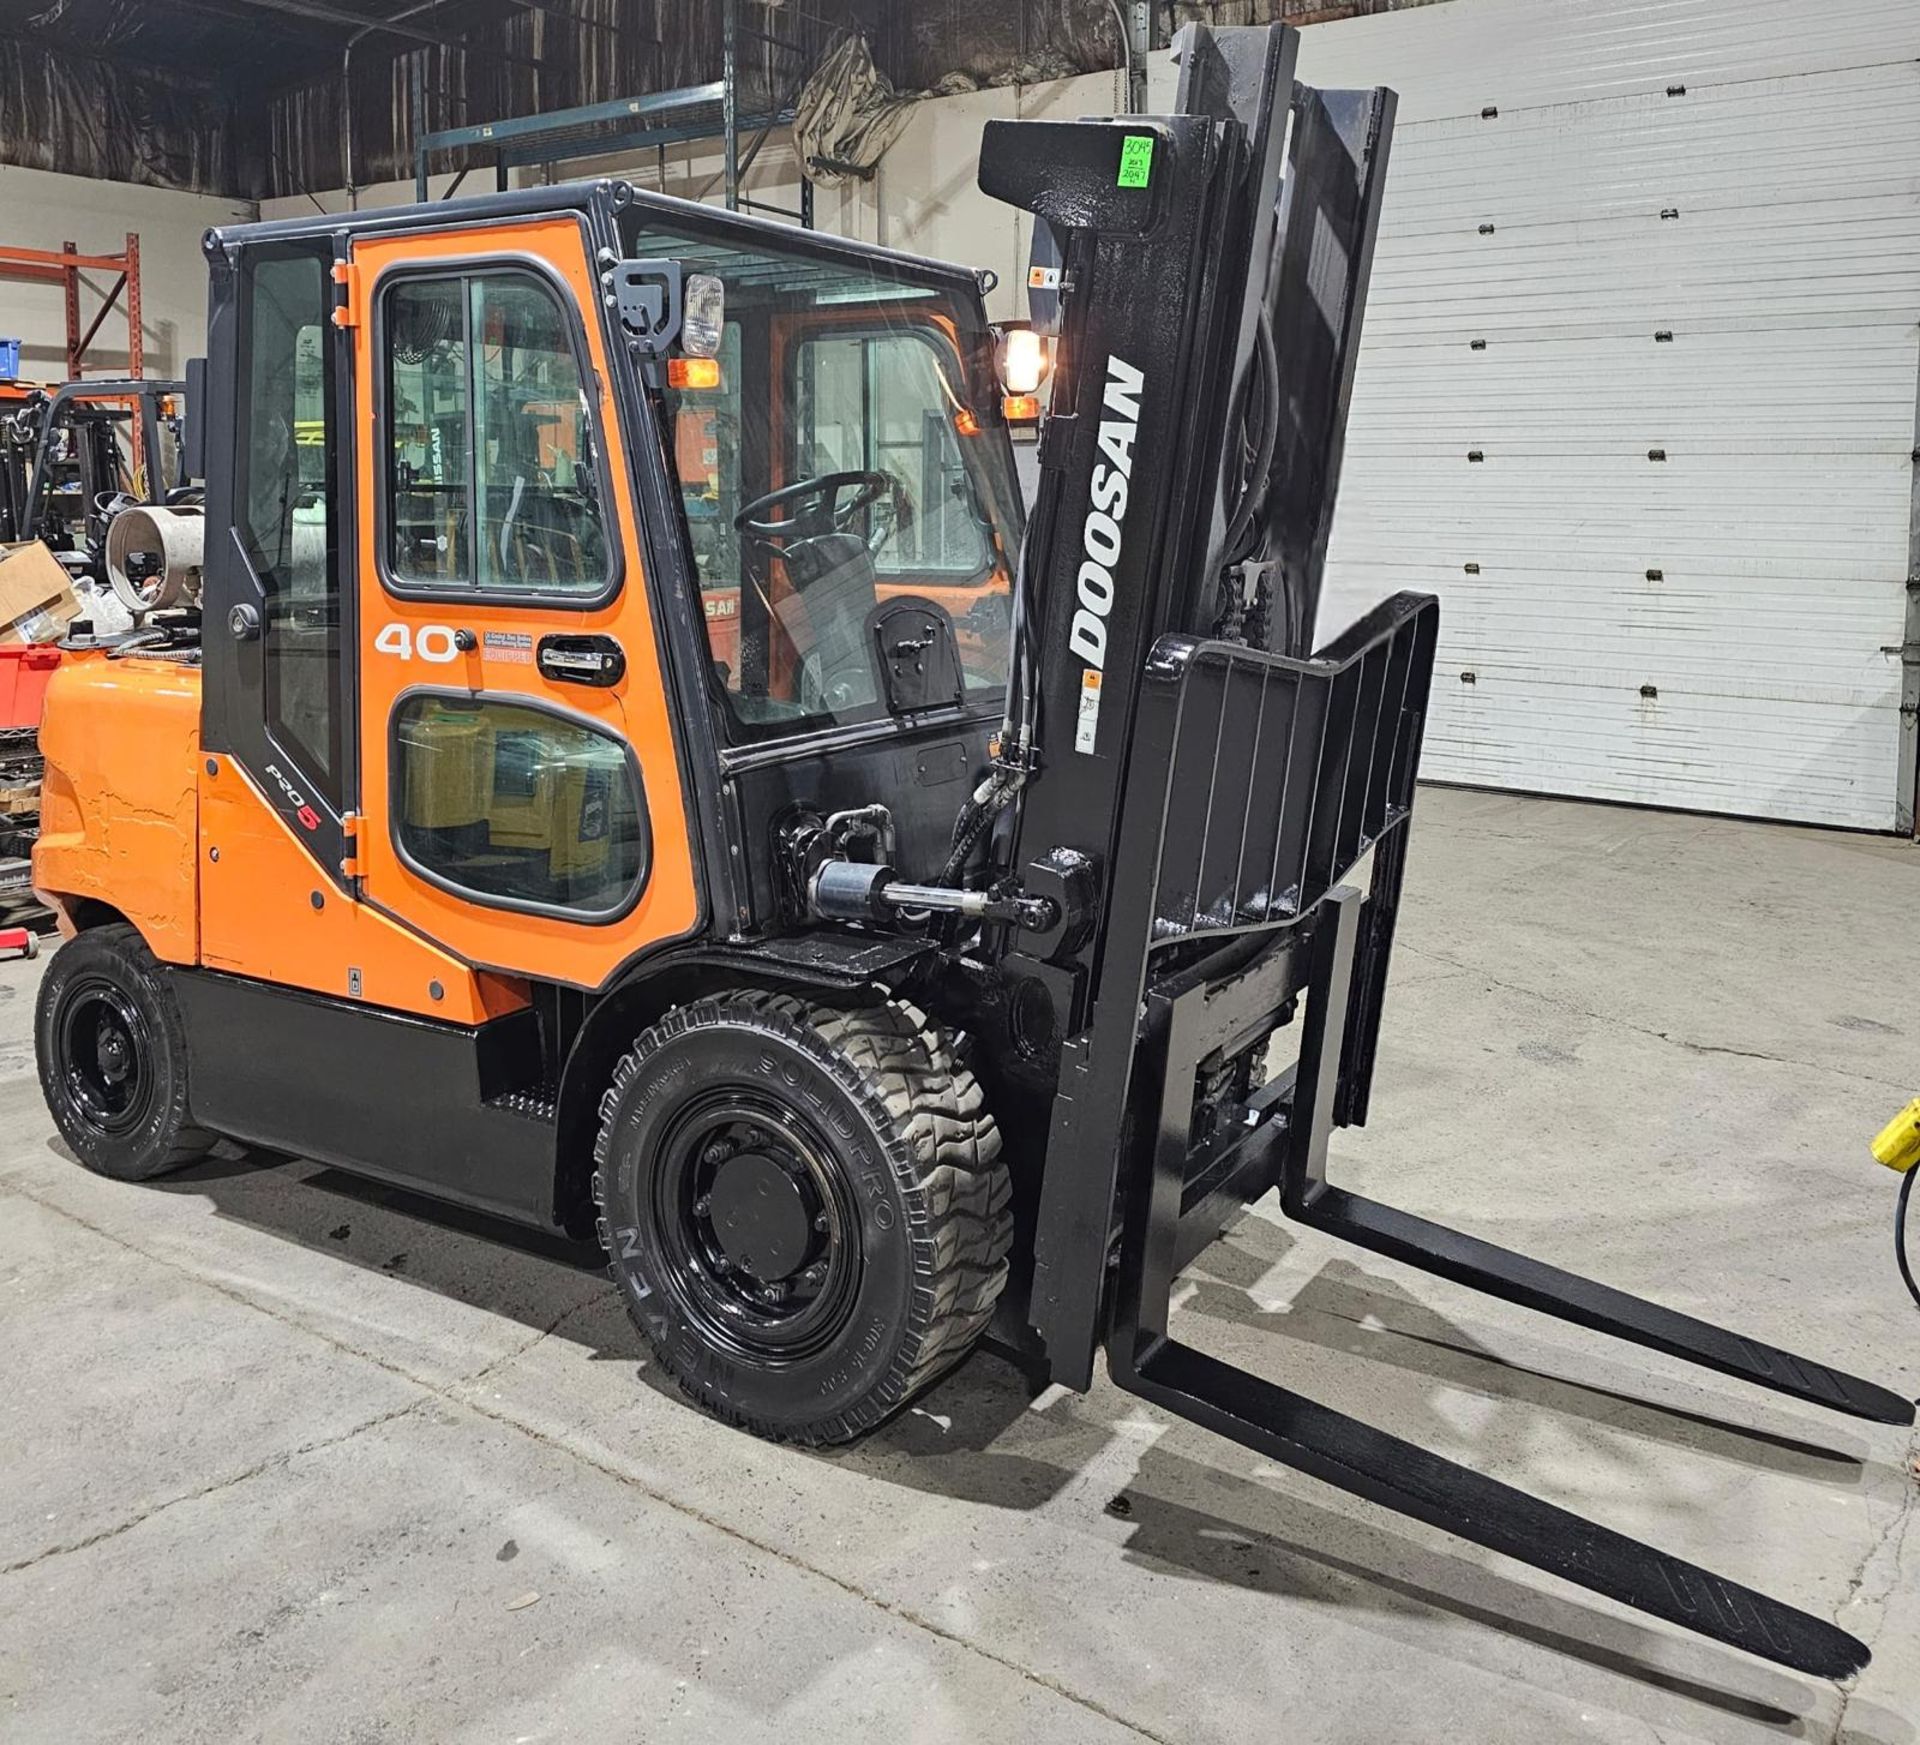 2017 Doosan 8,000 Capacity OUTDOOR LPG (Propane) Forklift with sideshift & 3-STAGE MAST 185" load - Image 6 of 8